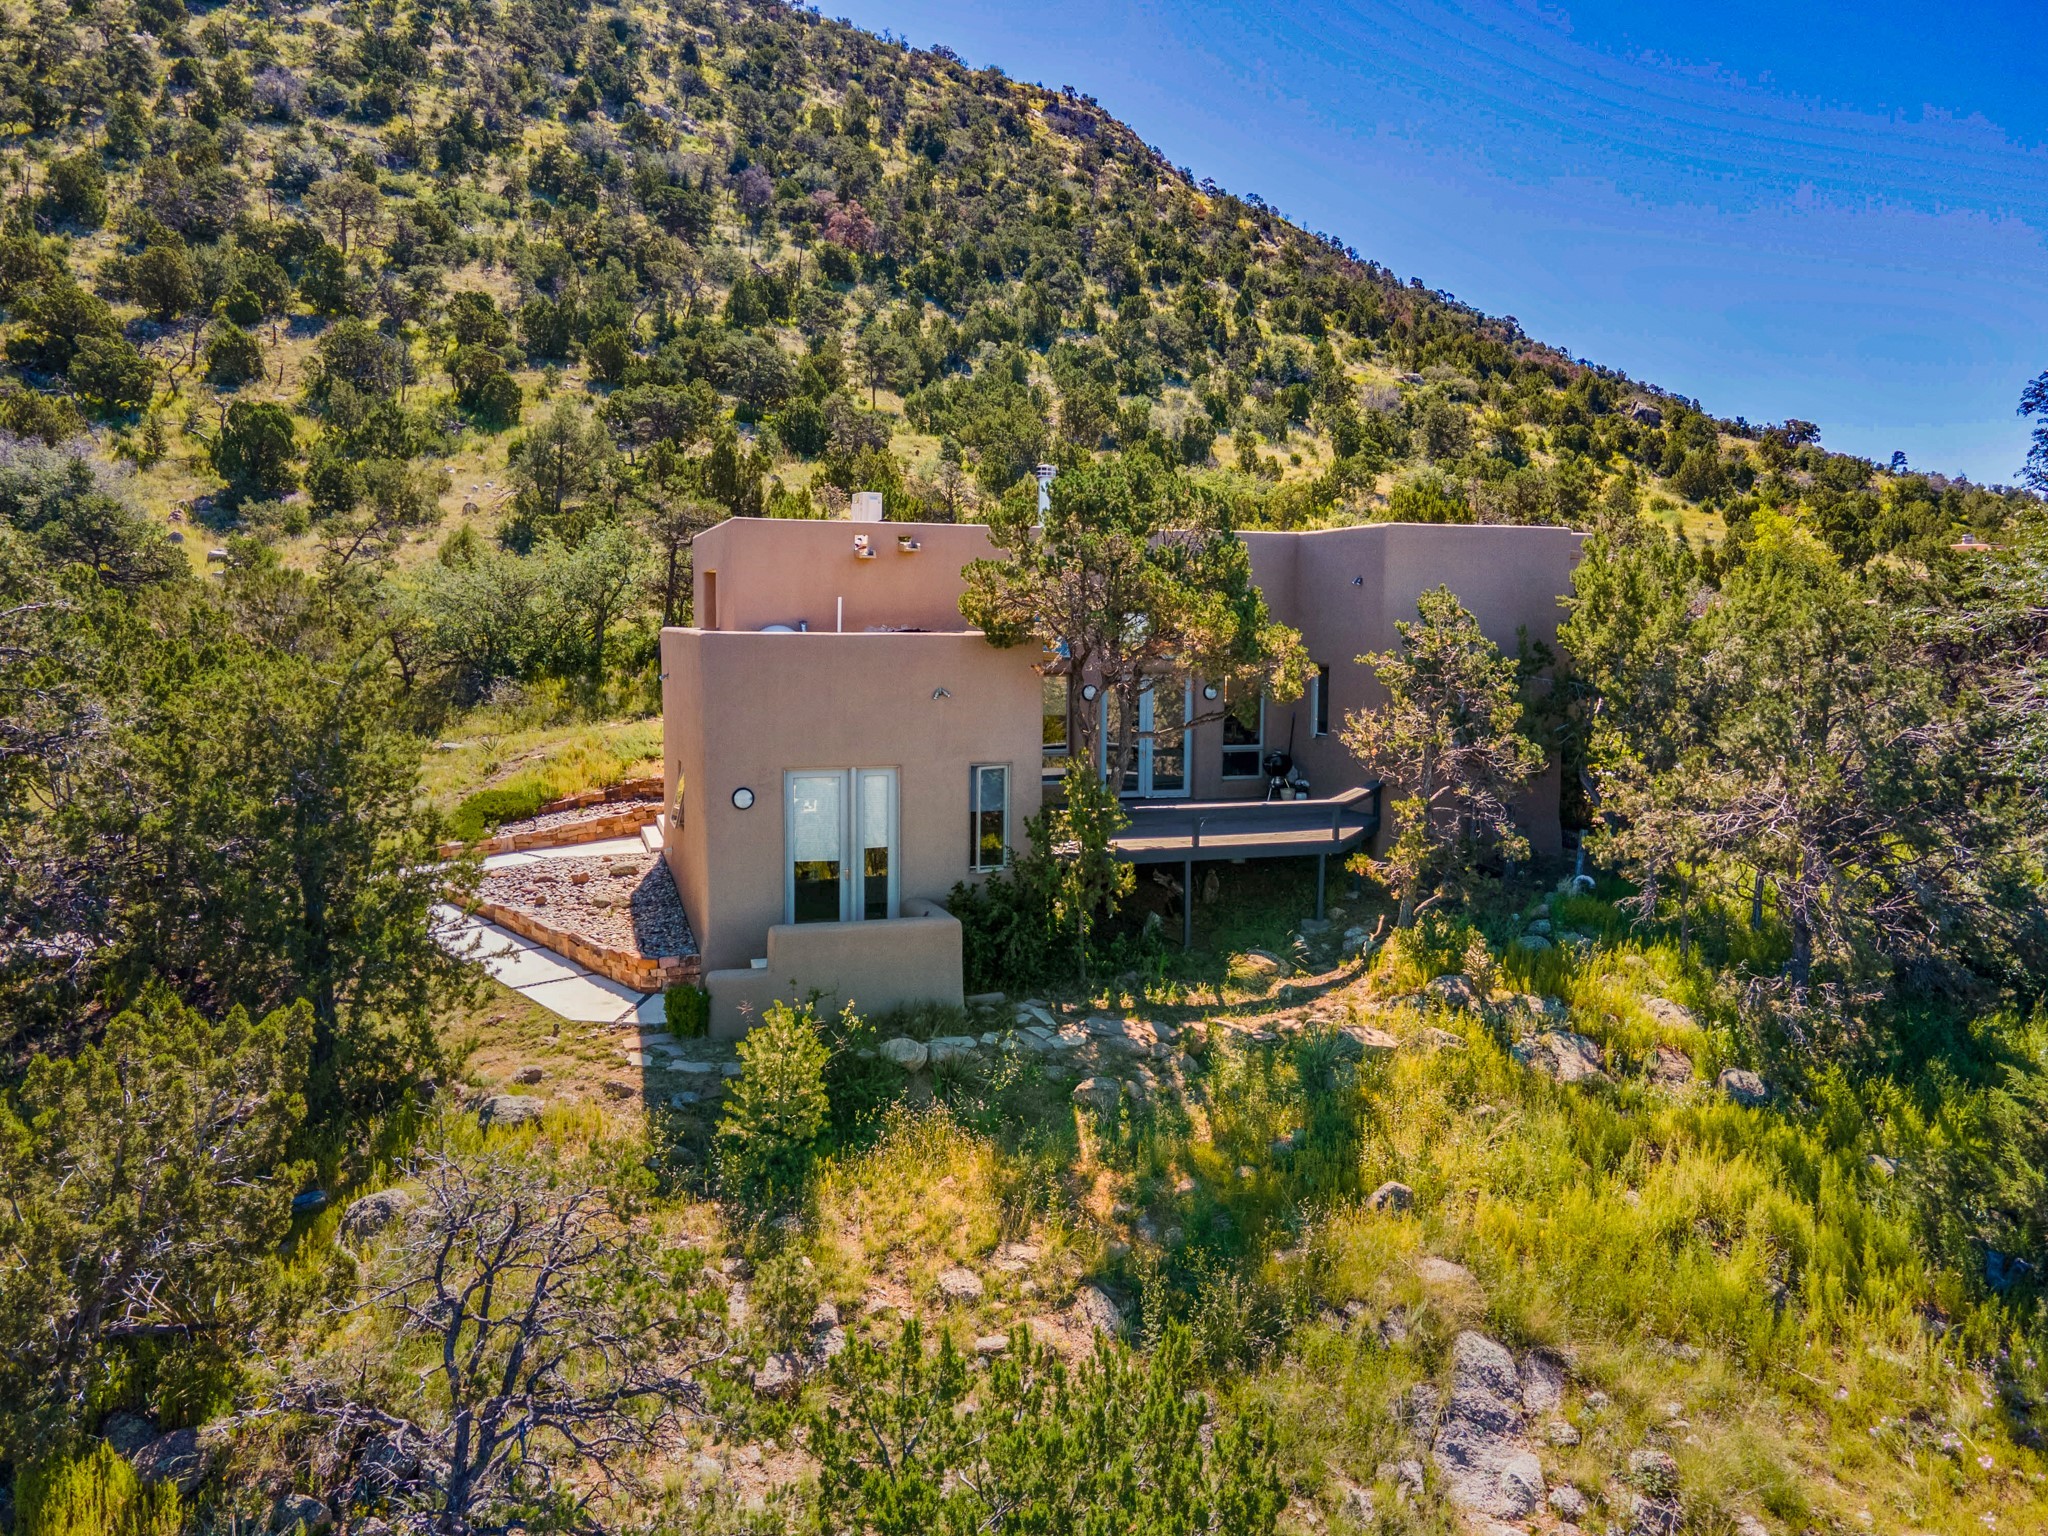 43 Calimo Circle, Santa Fe, New Mexico 87505, 2 Bedrooms Bedrooms, ,2 BathroomsBathrooms,Residential,For Sale,43 Calimo Circle,202232892